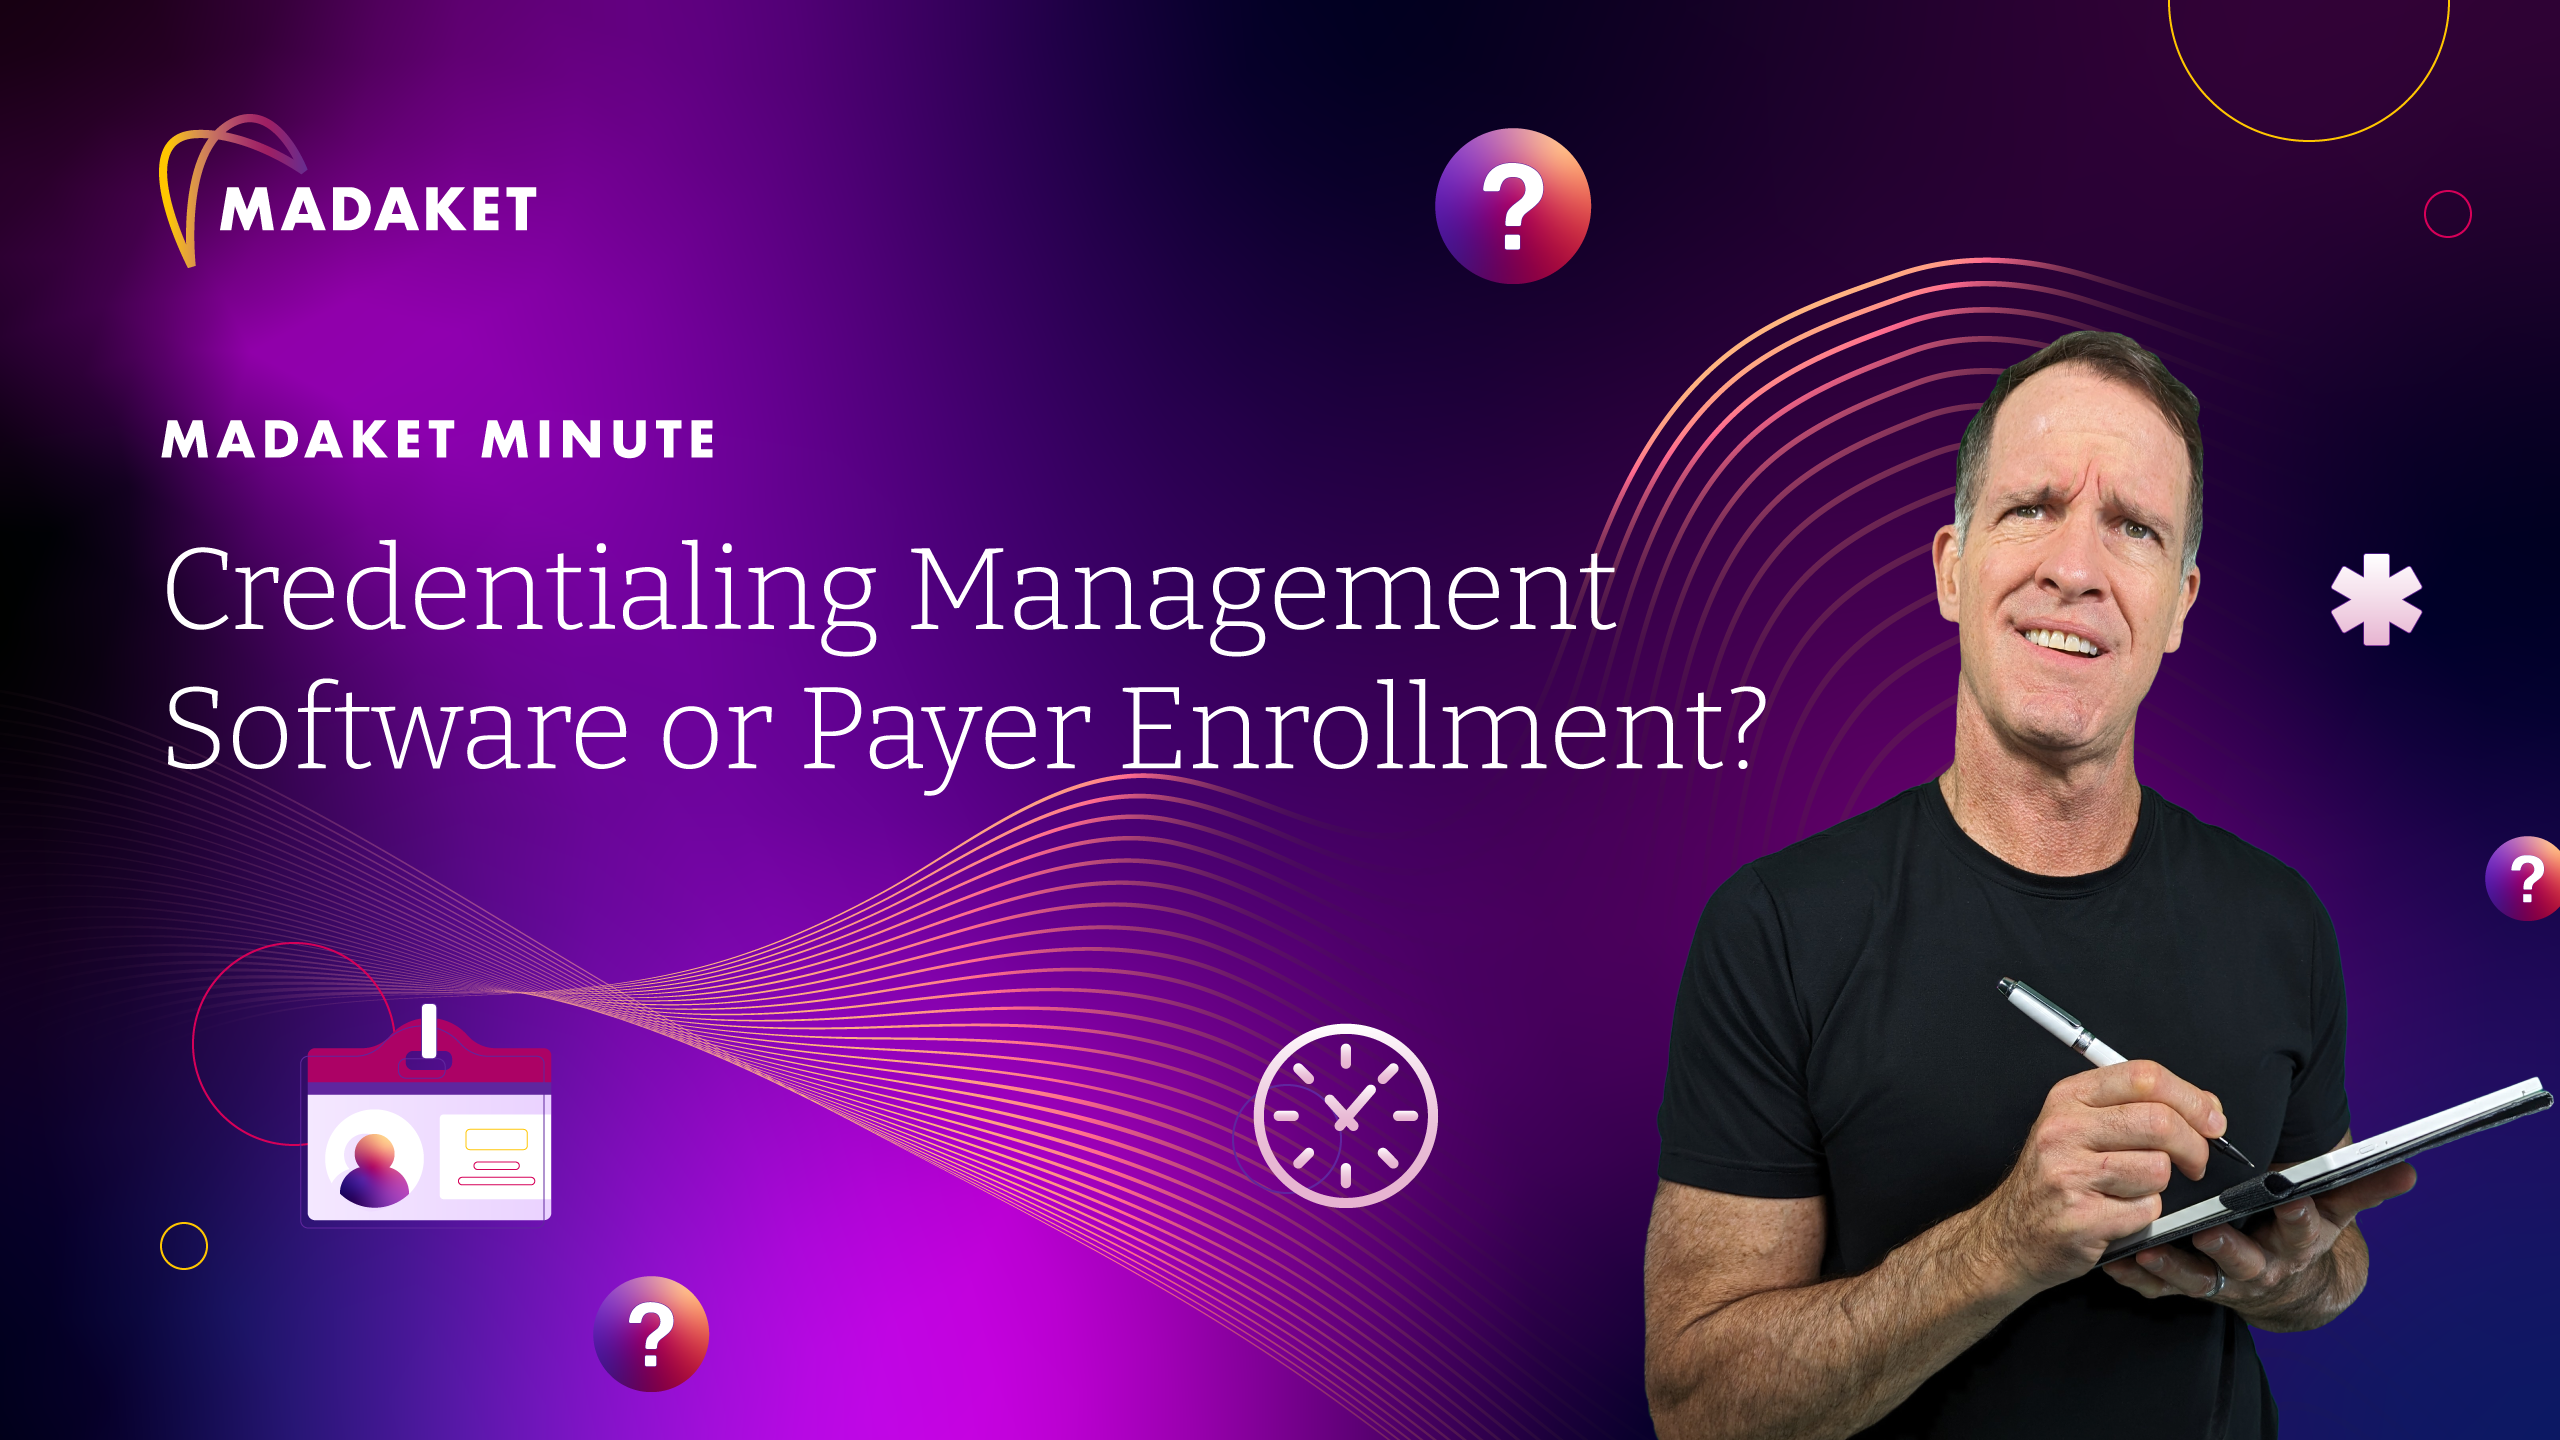 Madaket Minute Thumbnail for Credentialing Management Software or Payer Enrollment?